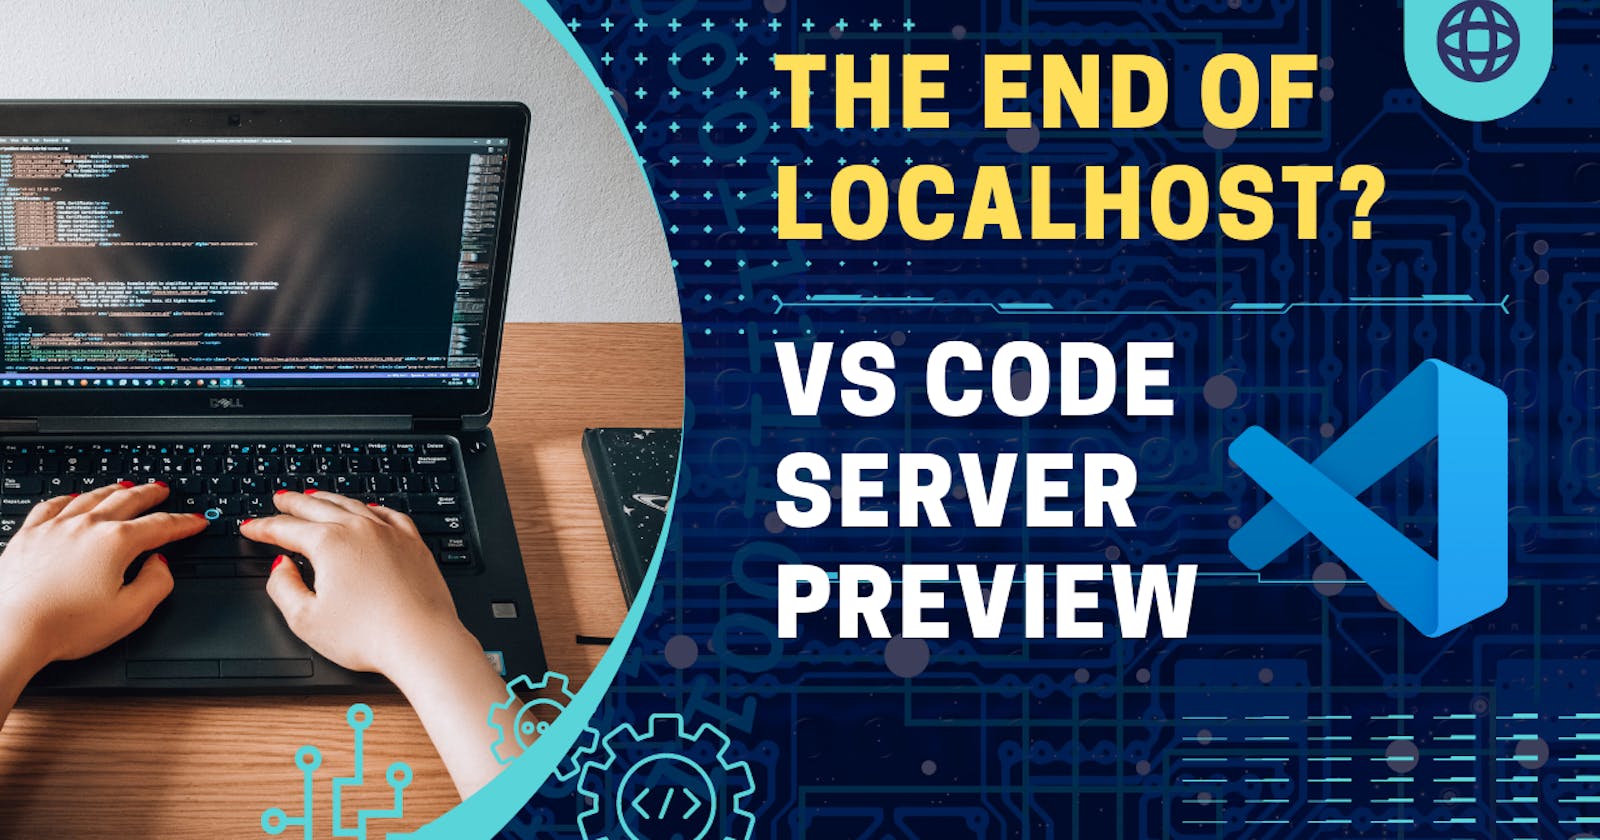 Is this the end of localhost? VS Code Server Preview